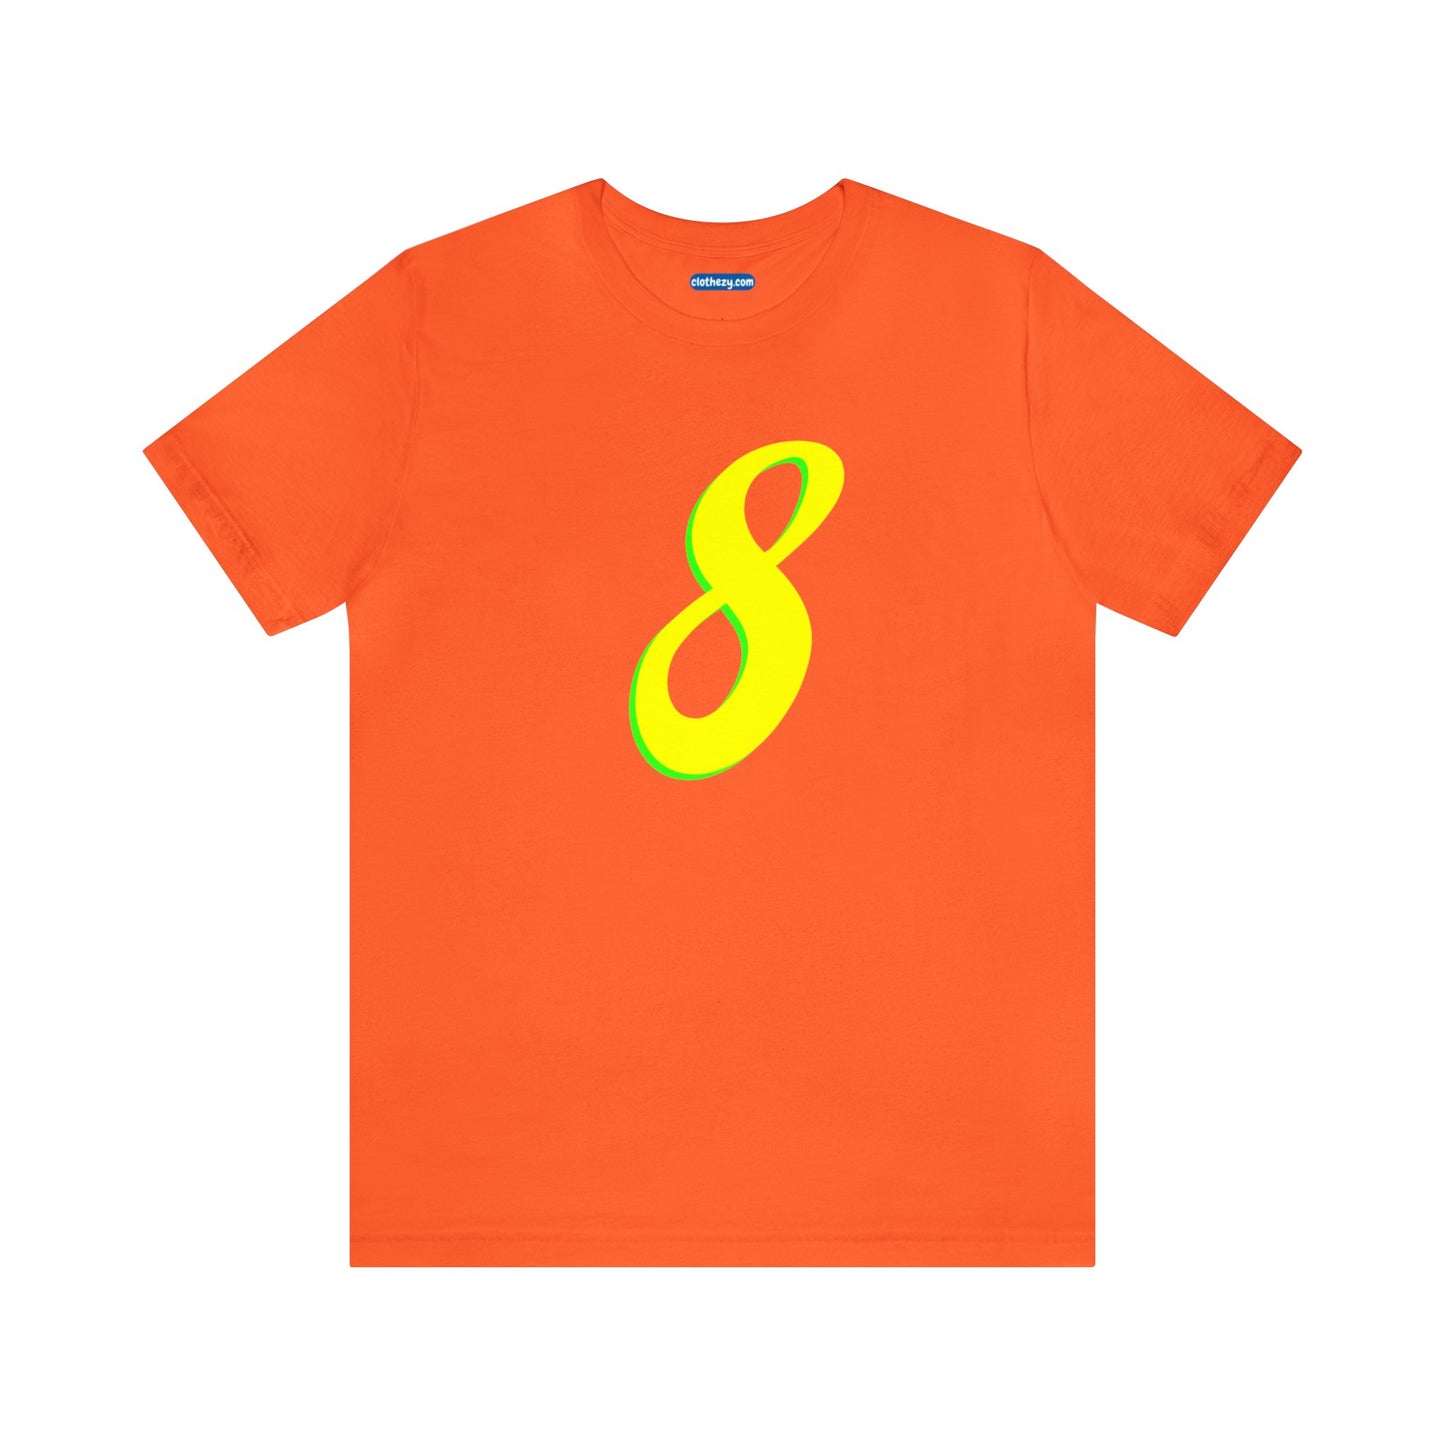 Number 8 Design - Soft Cotton Tee for birthdays and celebrations, Gift for friends and family, Multiple Options by clothezy.com in Pink Size Small - Buy Now